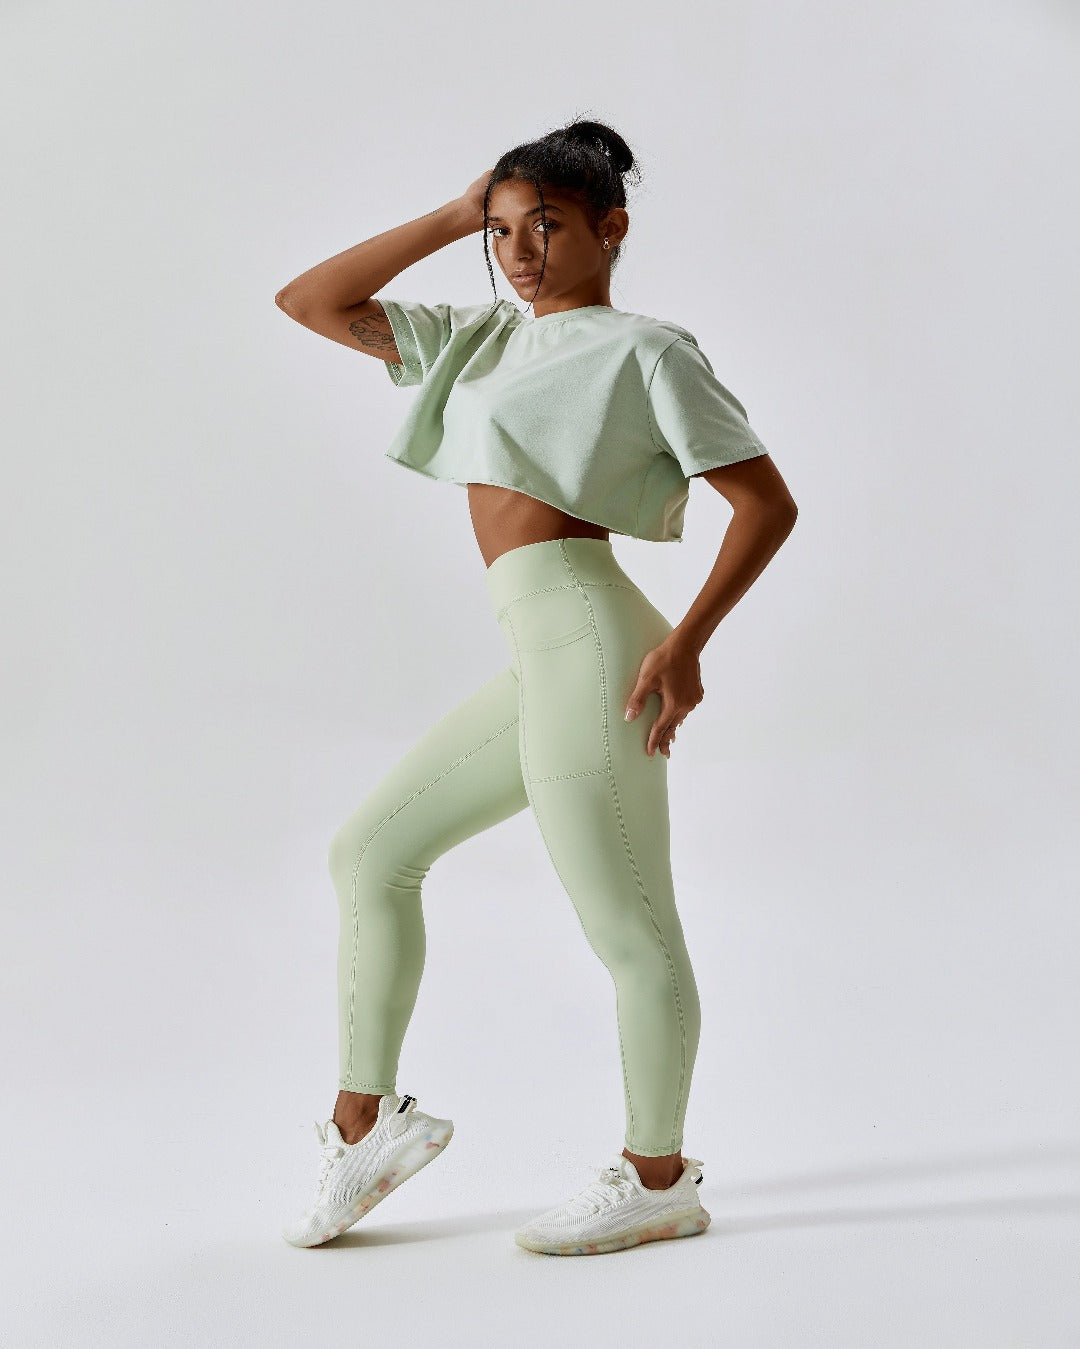 Pea green oversized short sleeve cropped t-shirt